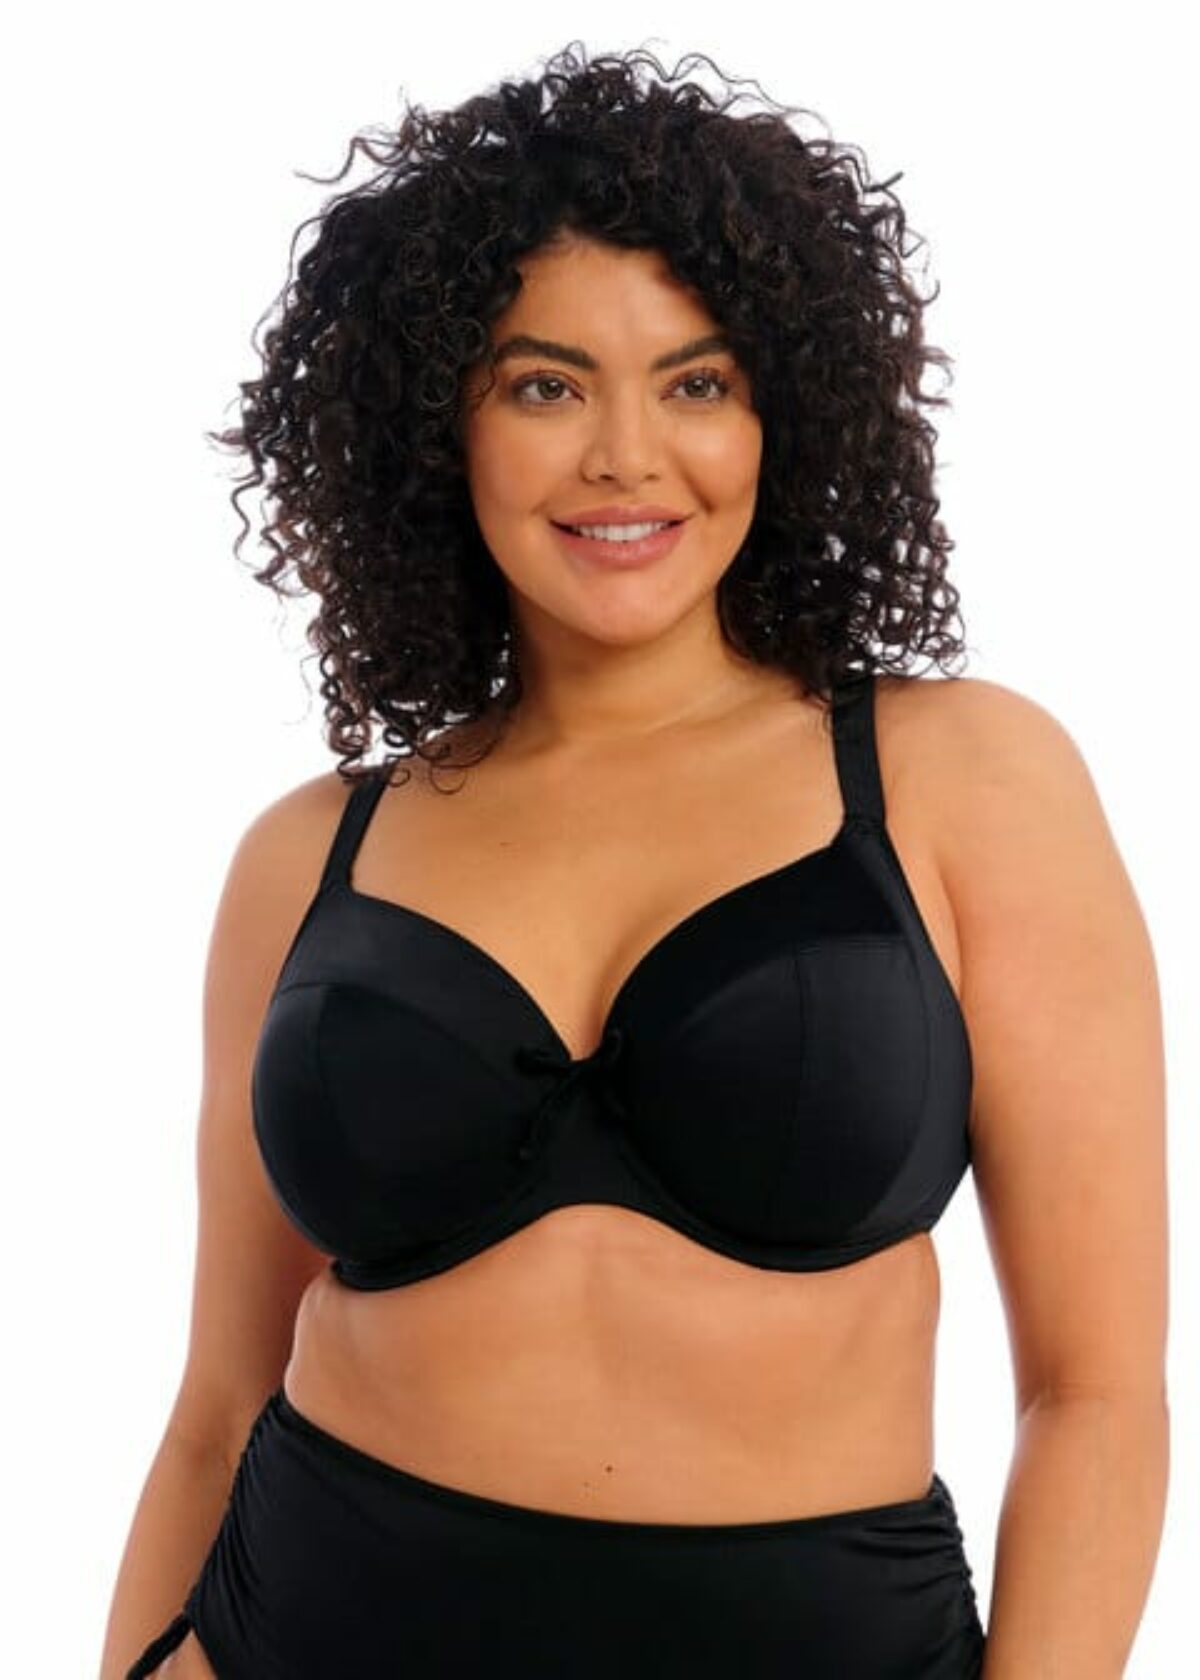 Swim by Elomi - Electroflower Moulded Swimsuit – Black Country Bra Lady